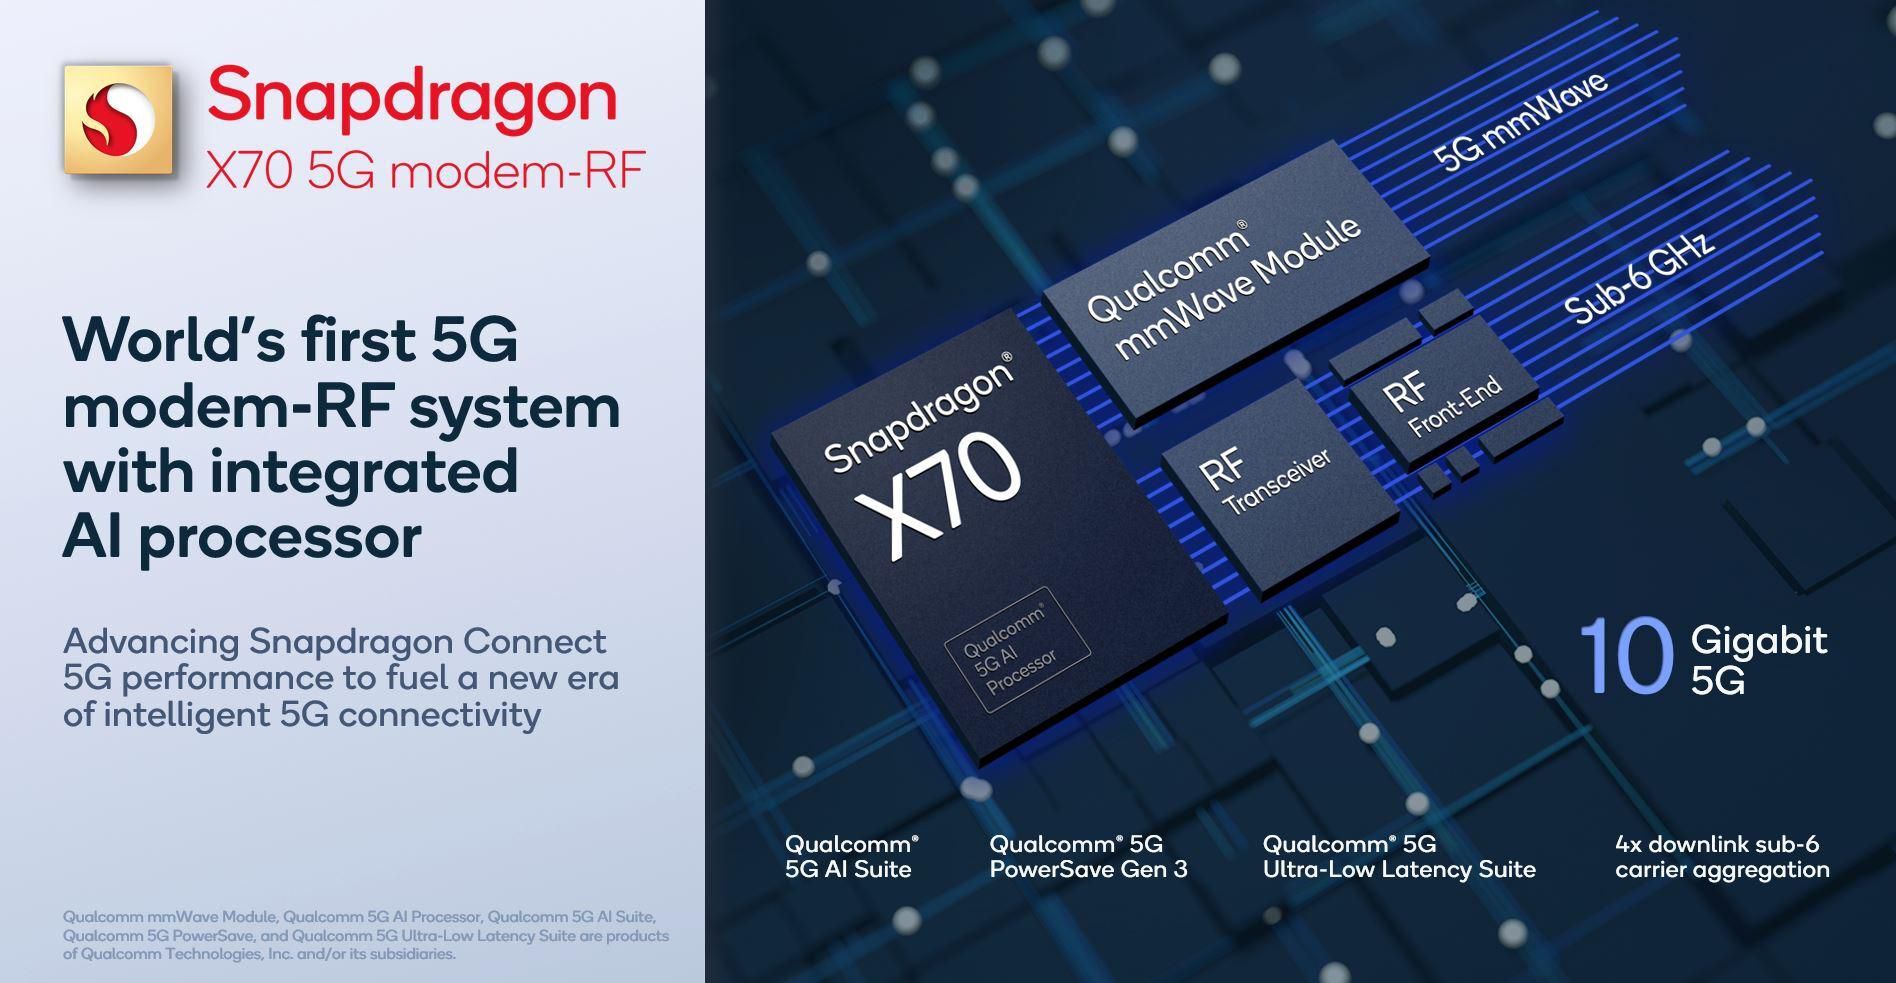 Apple's iPhone 15 series features Qualcomm's Snapdragon X70 5G modem - The stakes are high as Apple hopes to replace Qualcomm's 5G iPhone modem